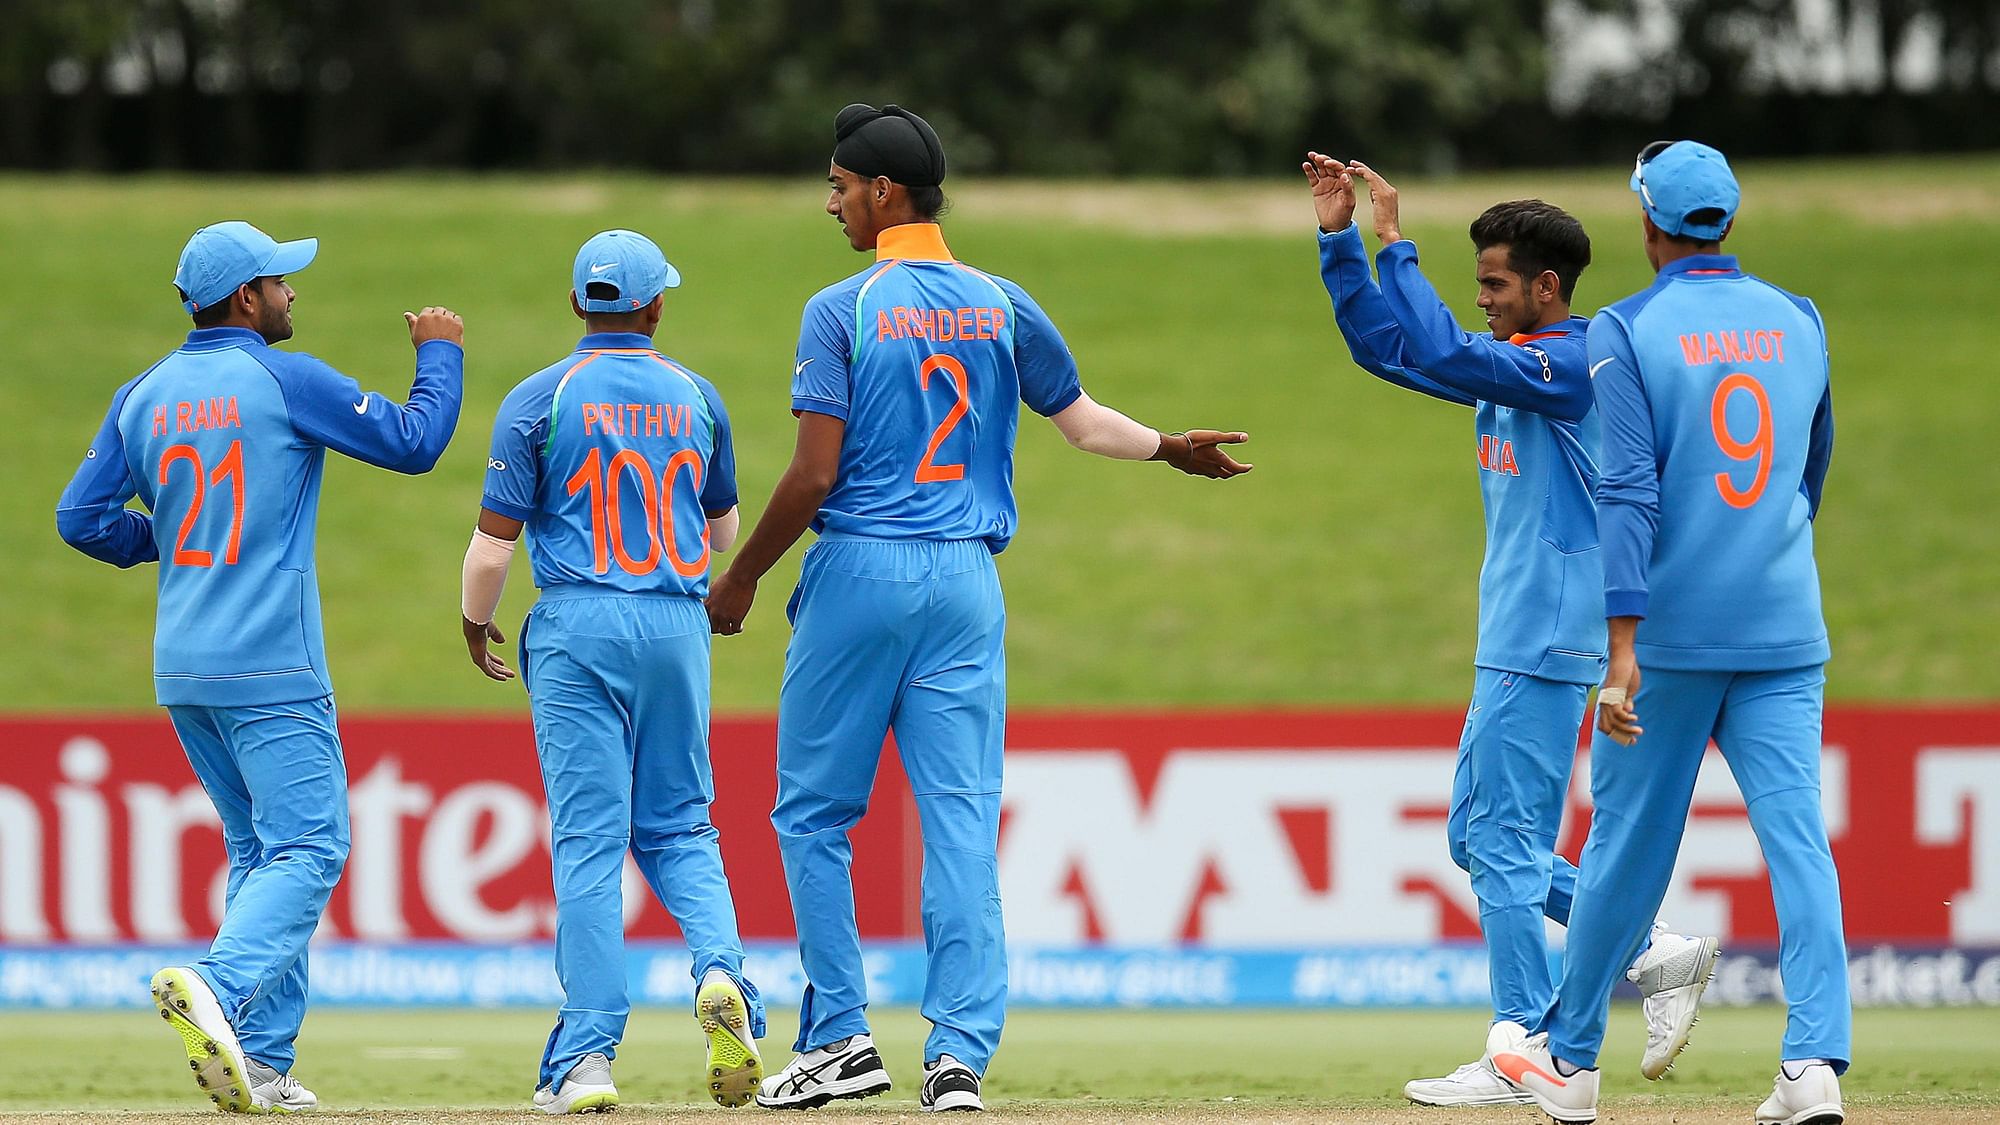 Under19 Cricket World Cup India take on Zimbabwe in the final group